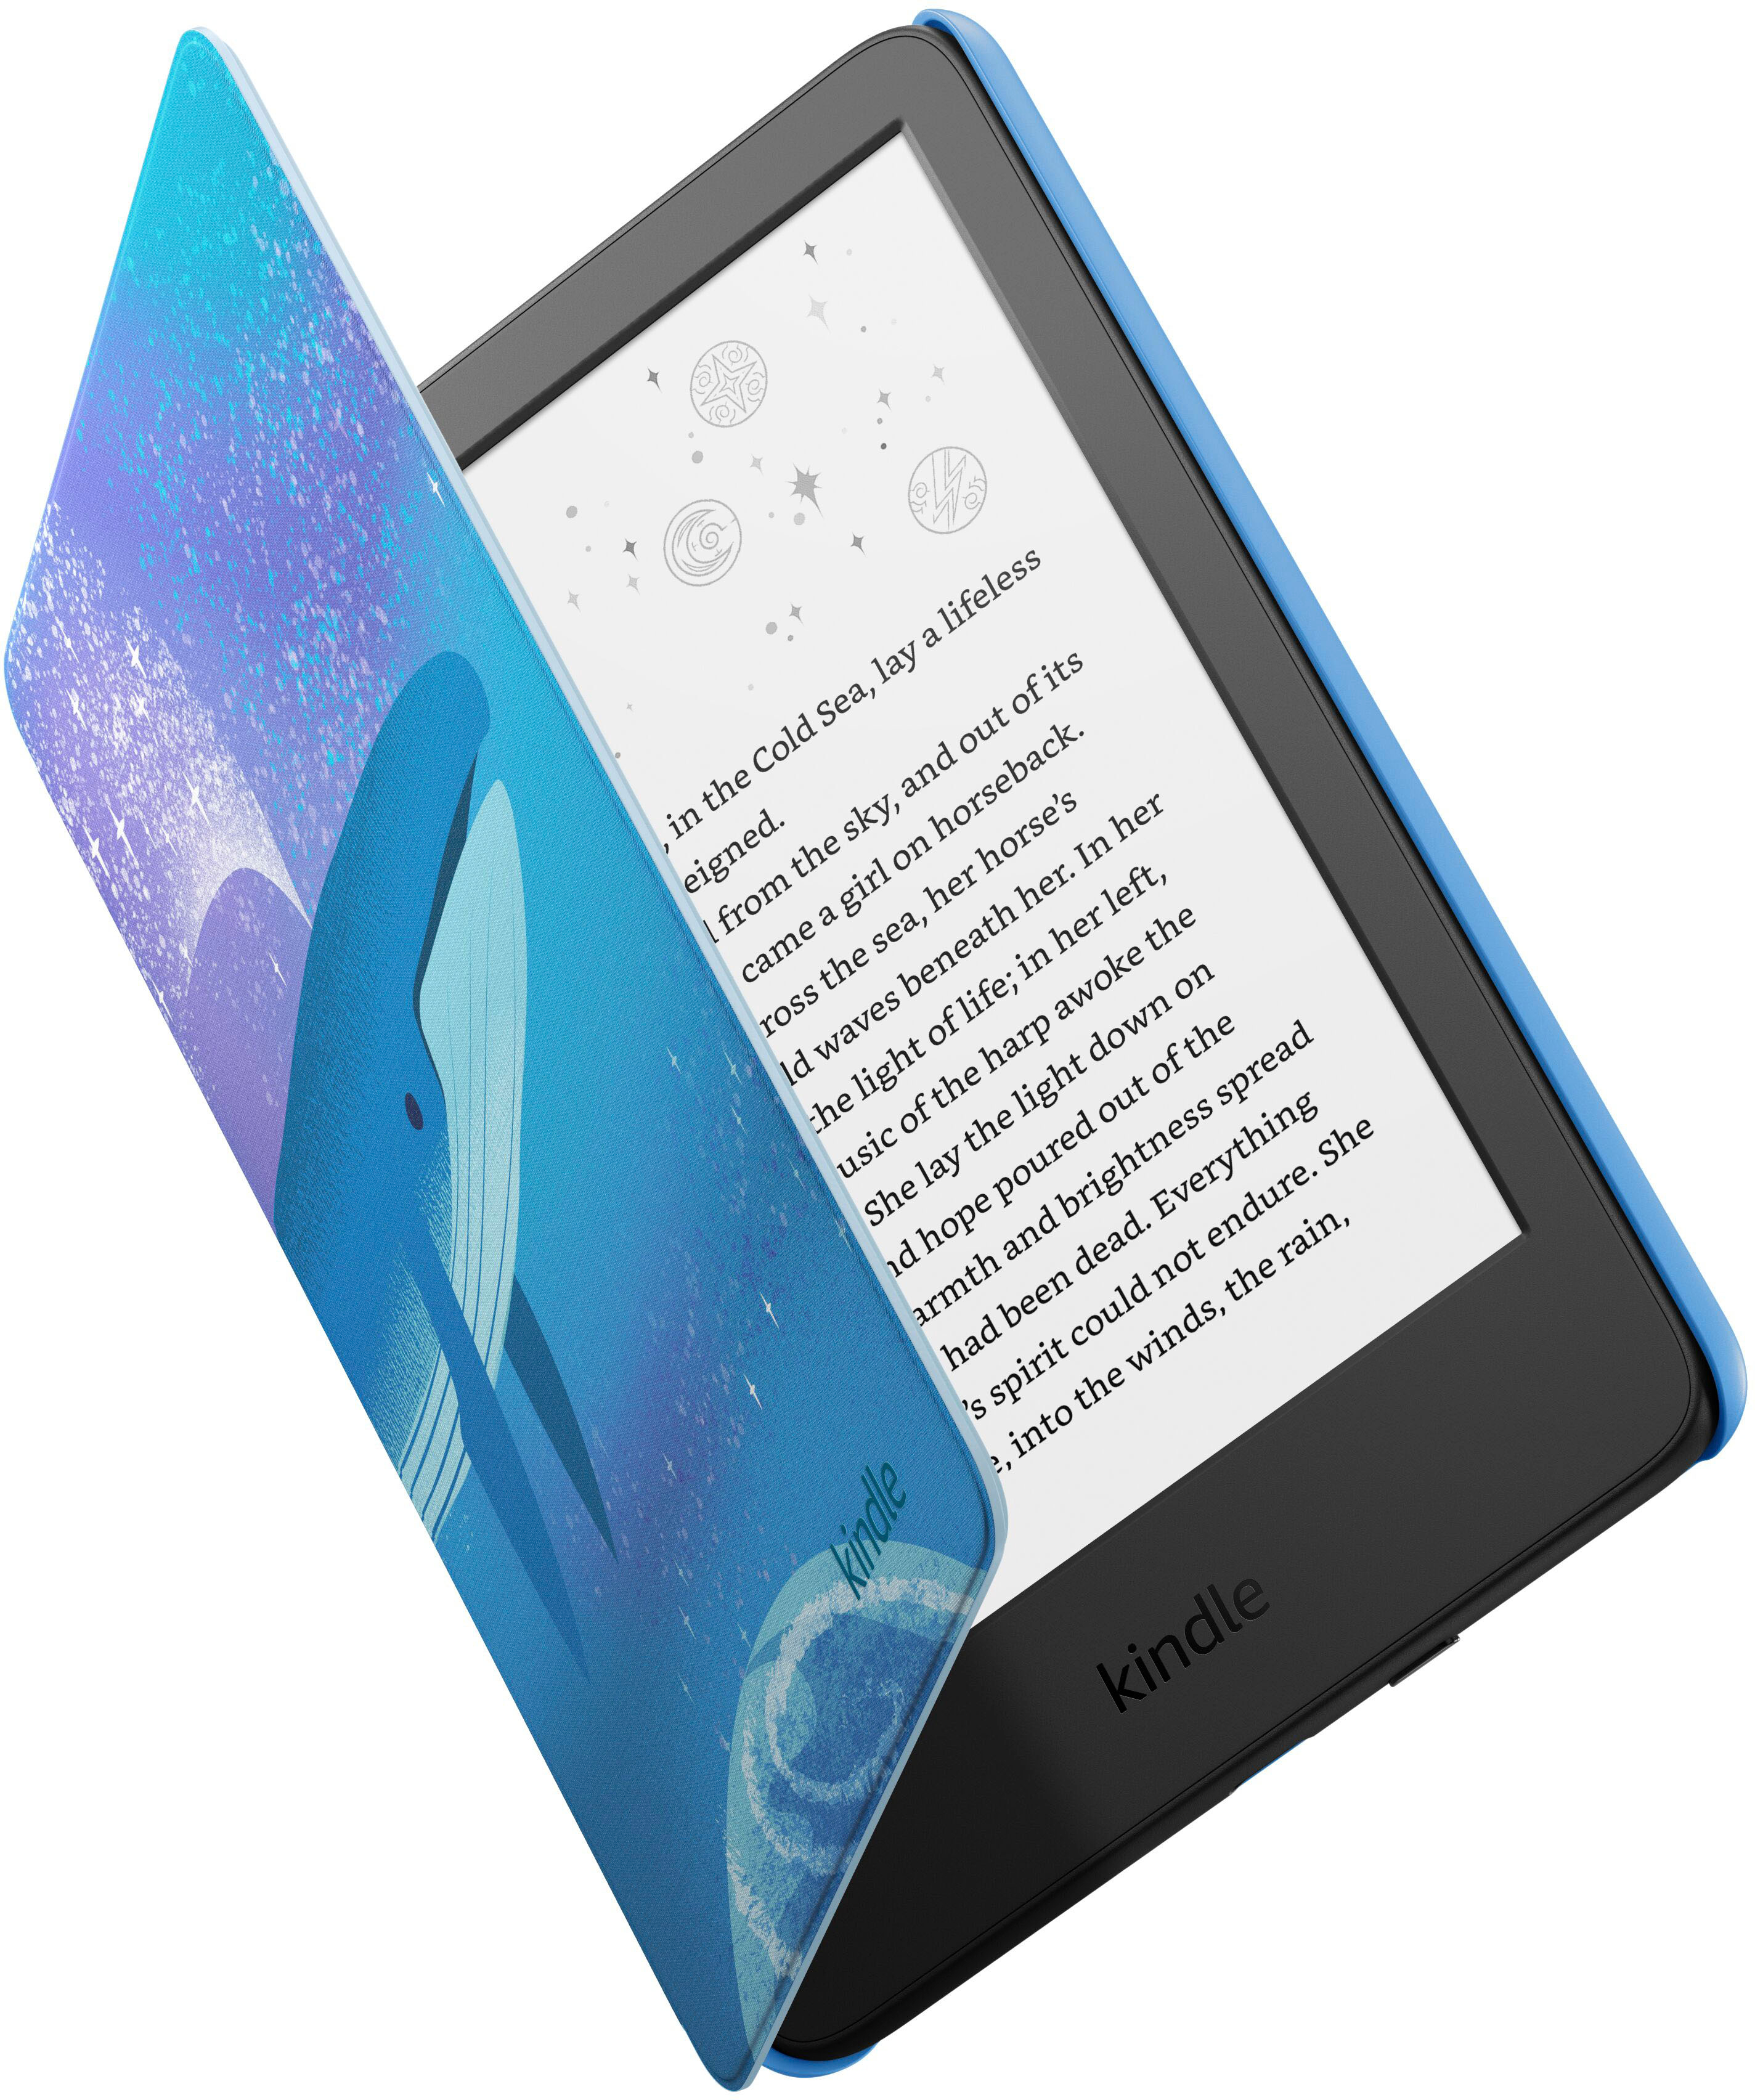  Certified Refurbished Kindle (2022 release) – The